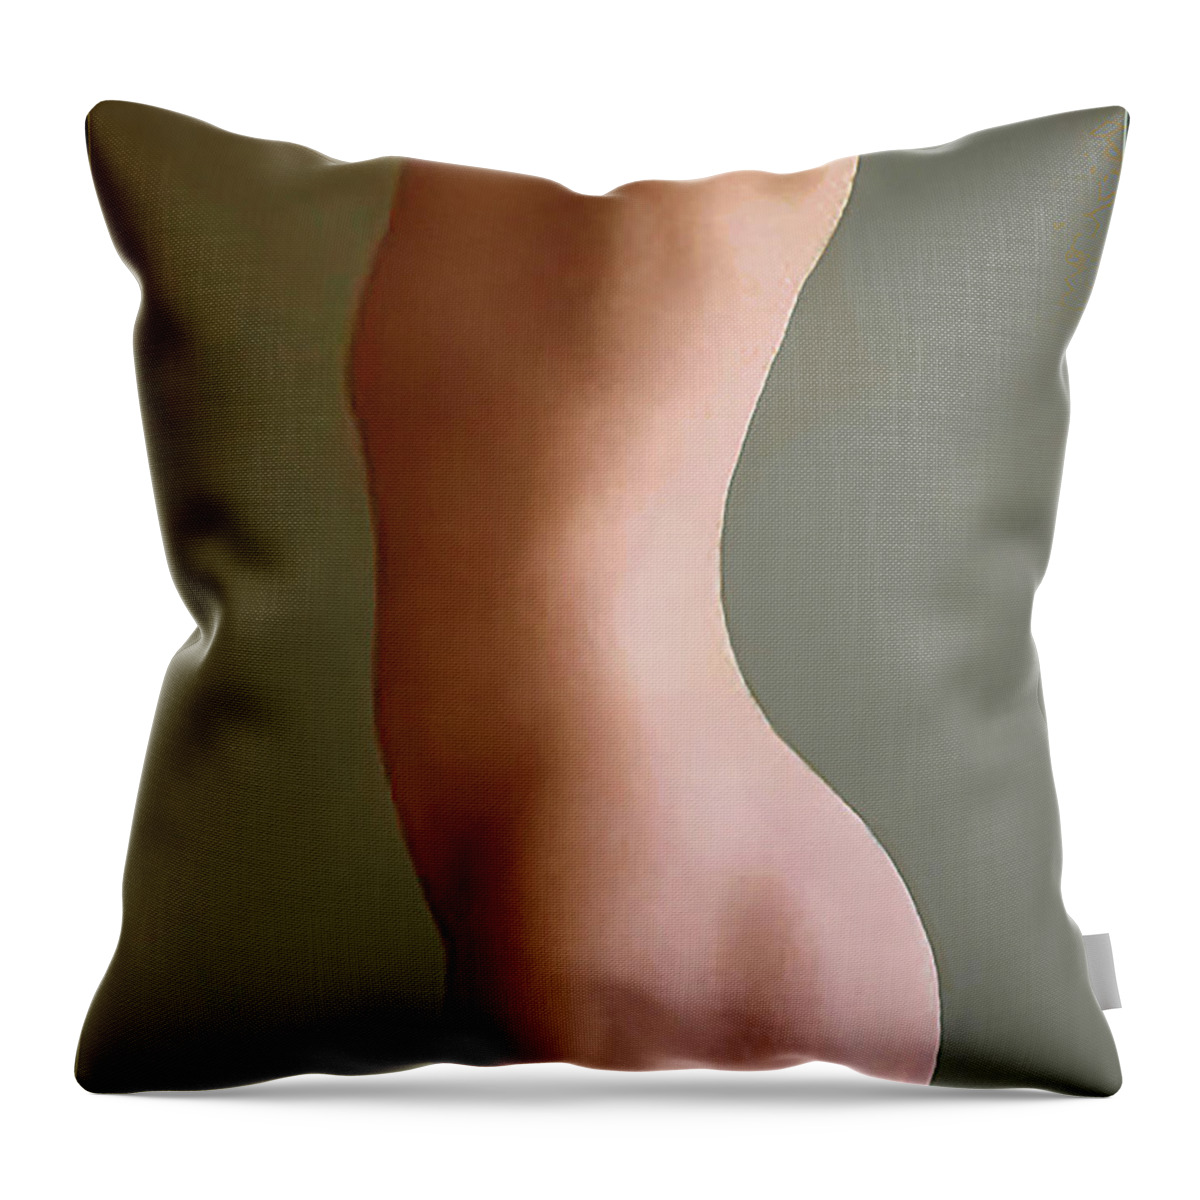  Throw Pillow featuring the digital art Andro C by James Lanigan Thompson MFA